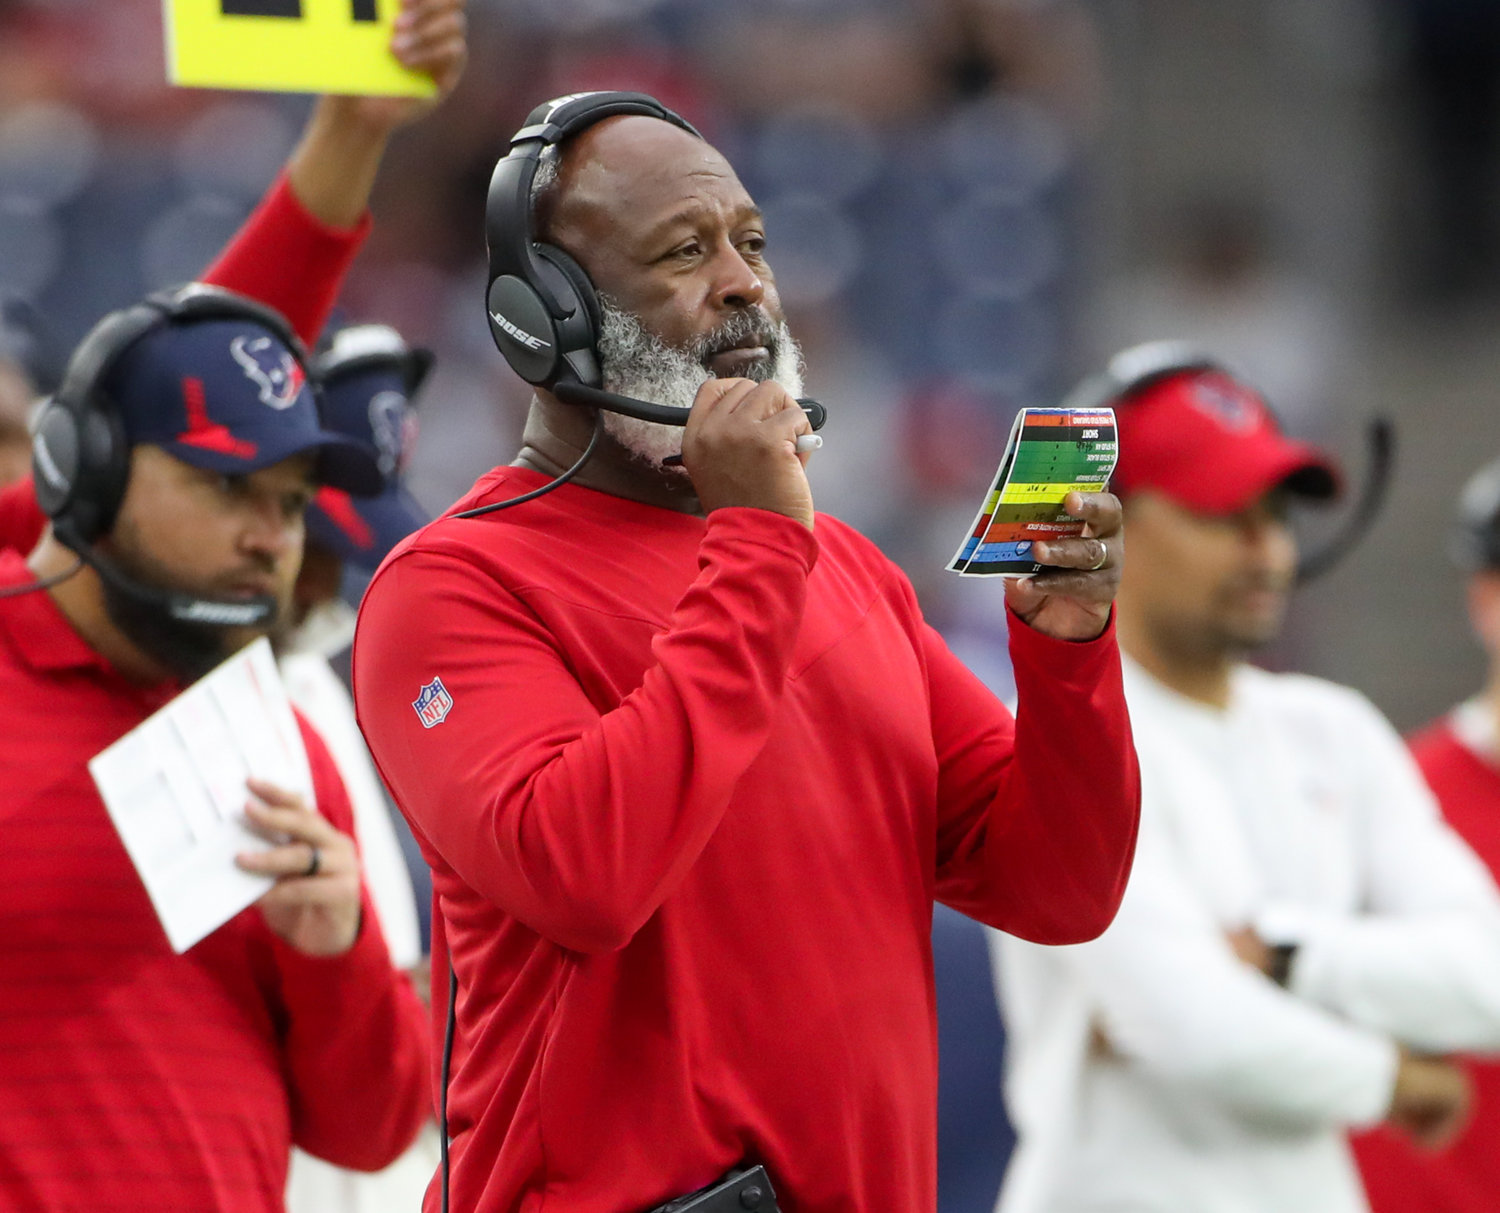 Houston Texans defensive coordinator Lovie Smith during an NFL game between the Texans and the Colts on December 5, 2021 in Houston, Texas. The Colts won, 31-0.